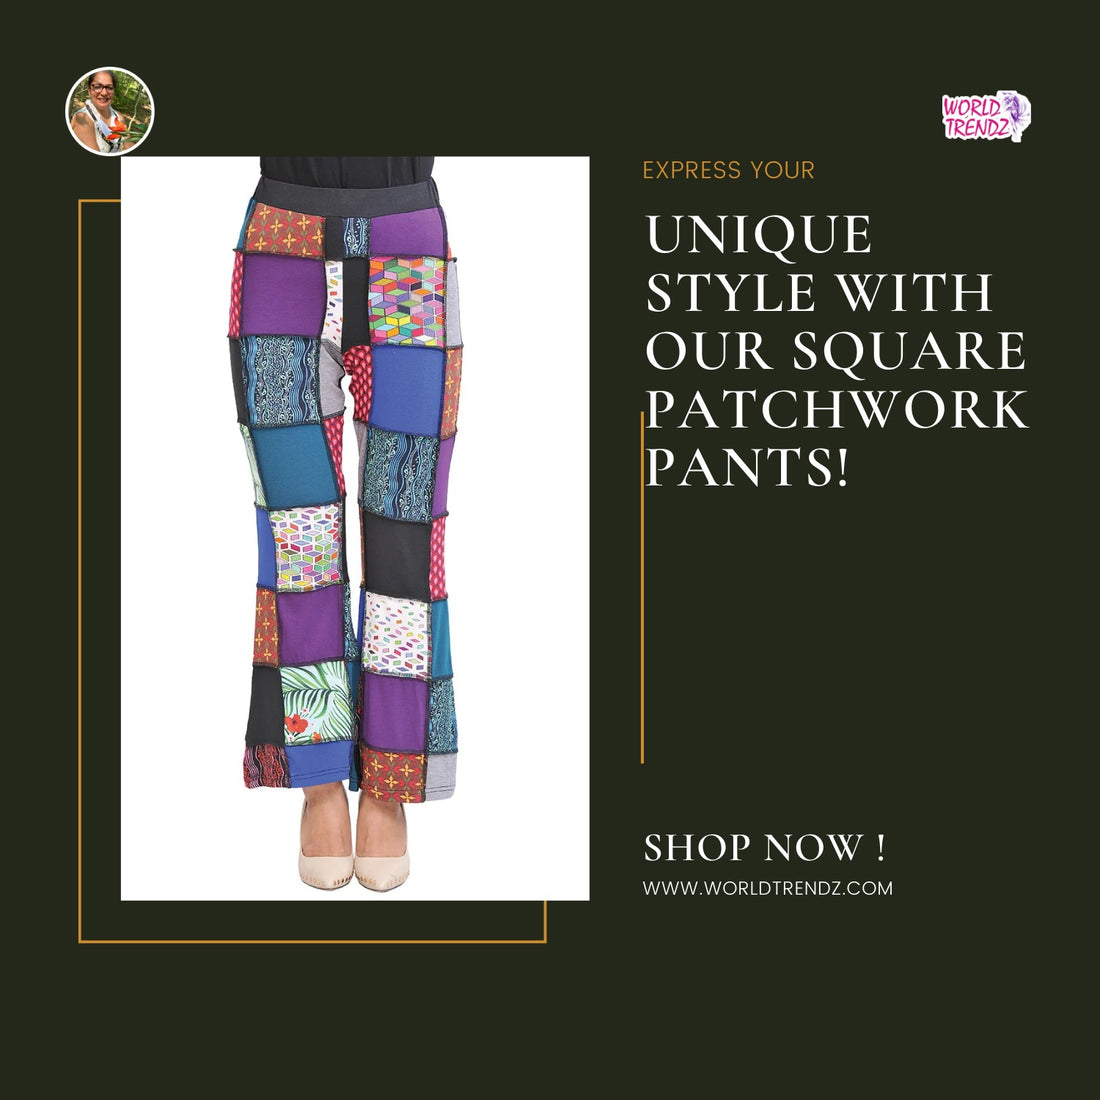 Pants Square Patchwork: The Fashion Trend Taking the World by Storm